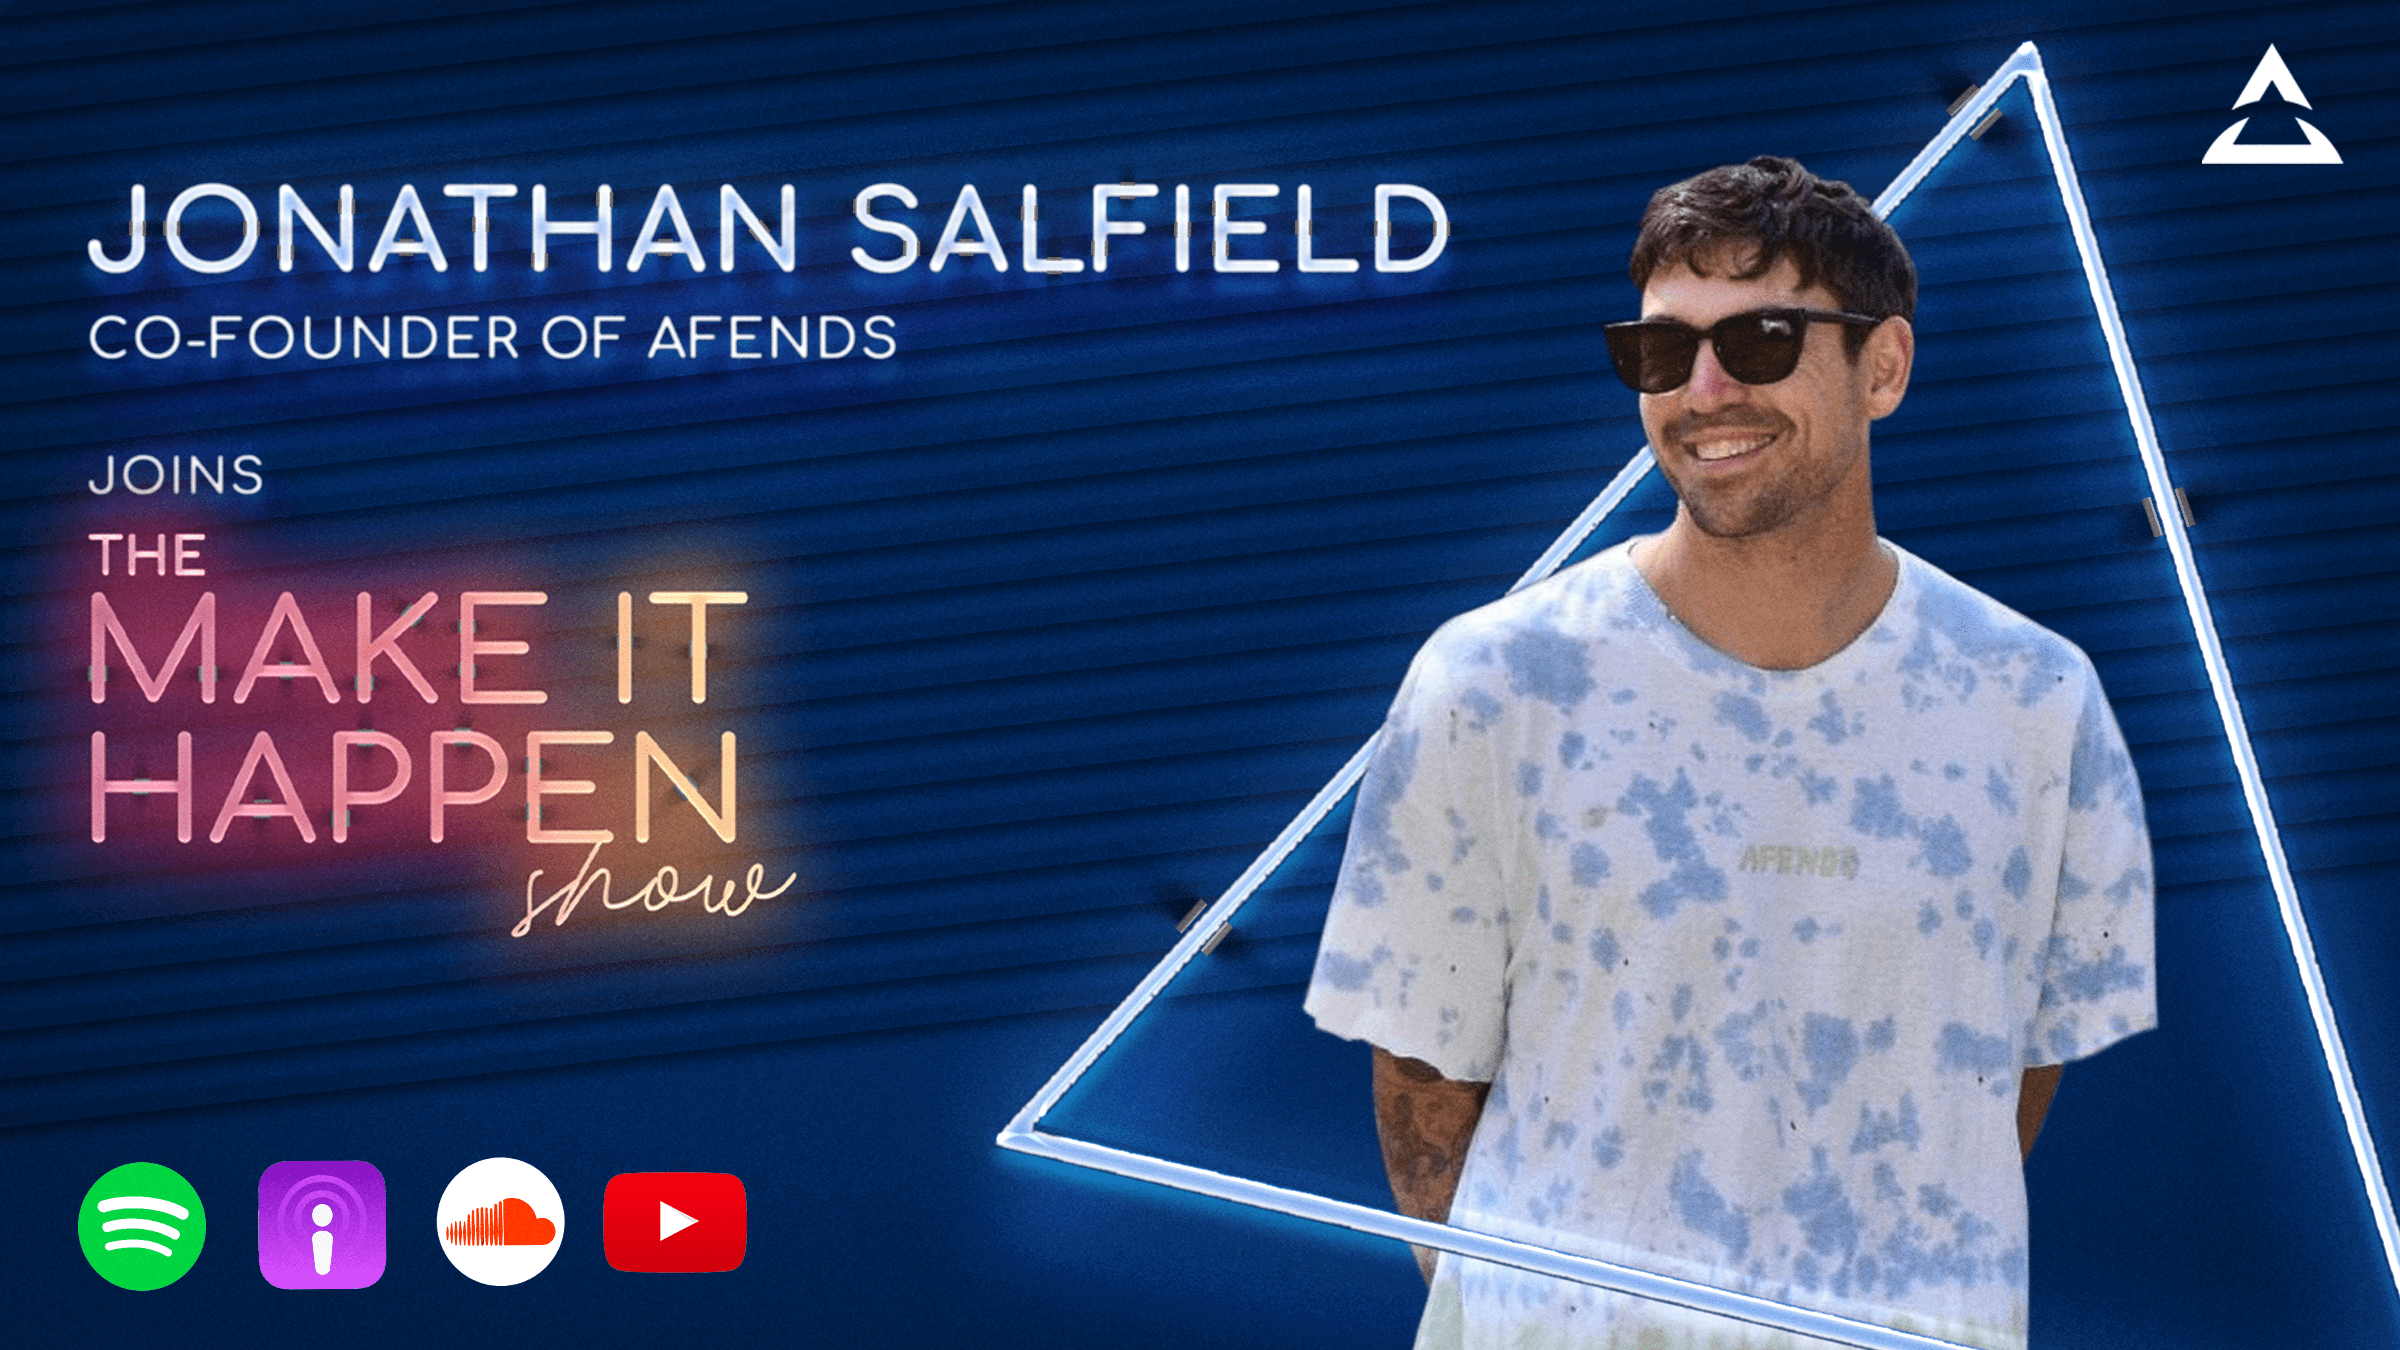 Jonathan Salfield, Co-founder of Afends, joins The Make It Happen Show